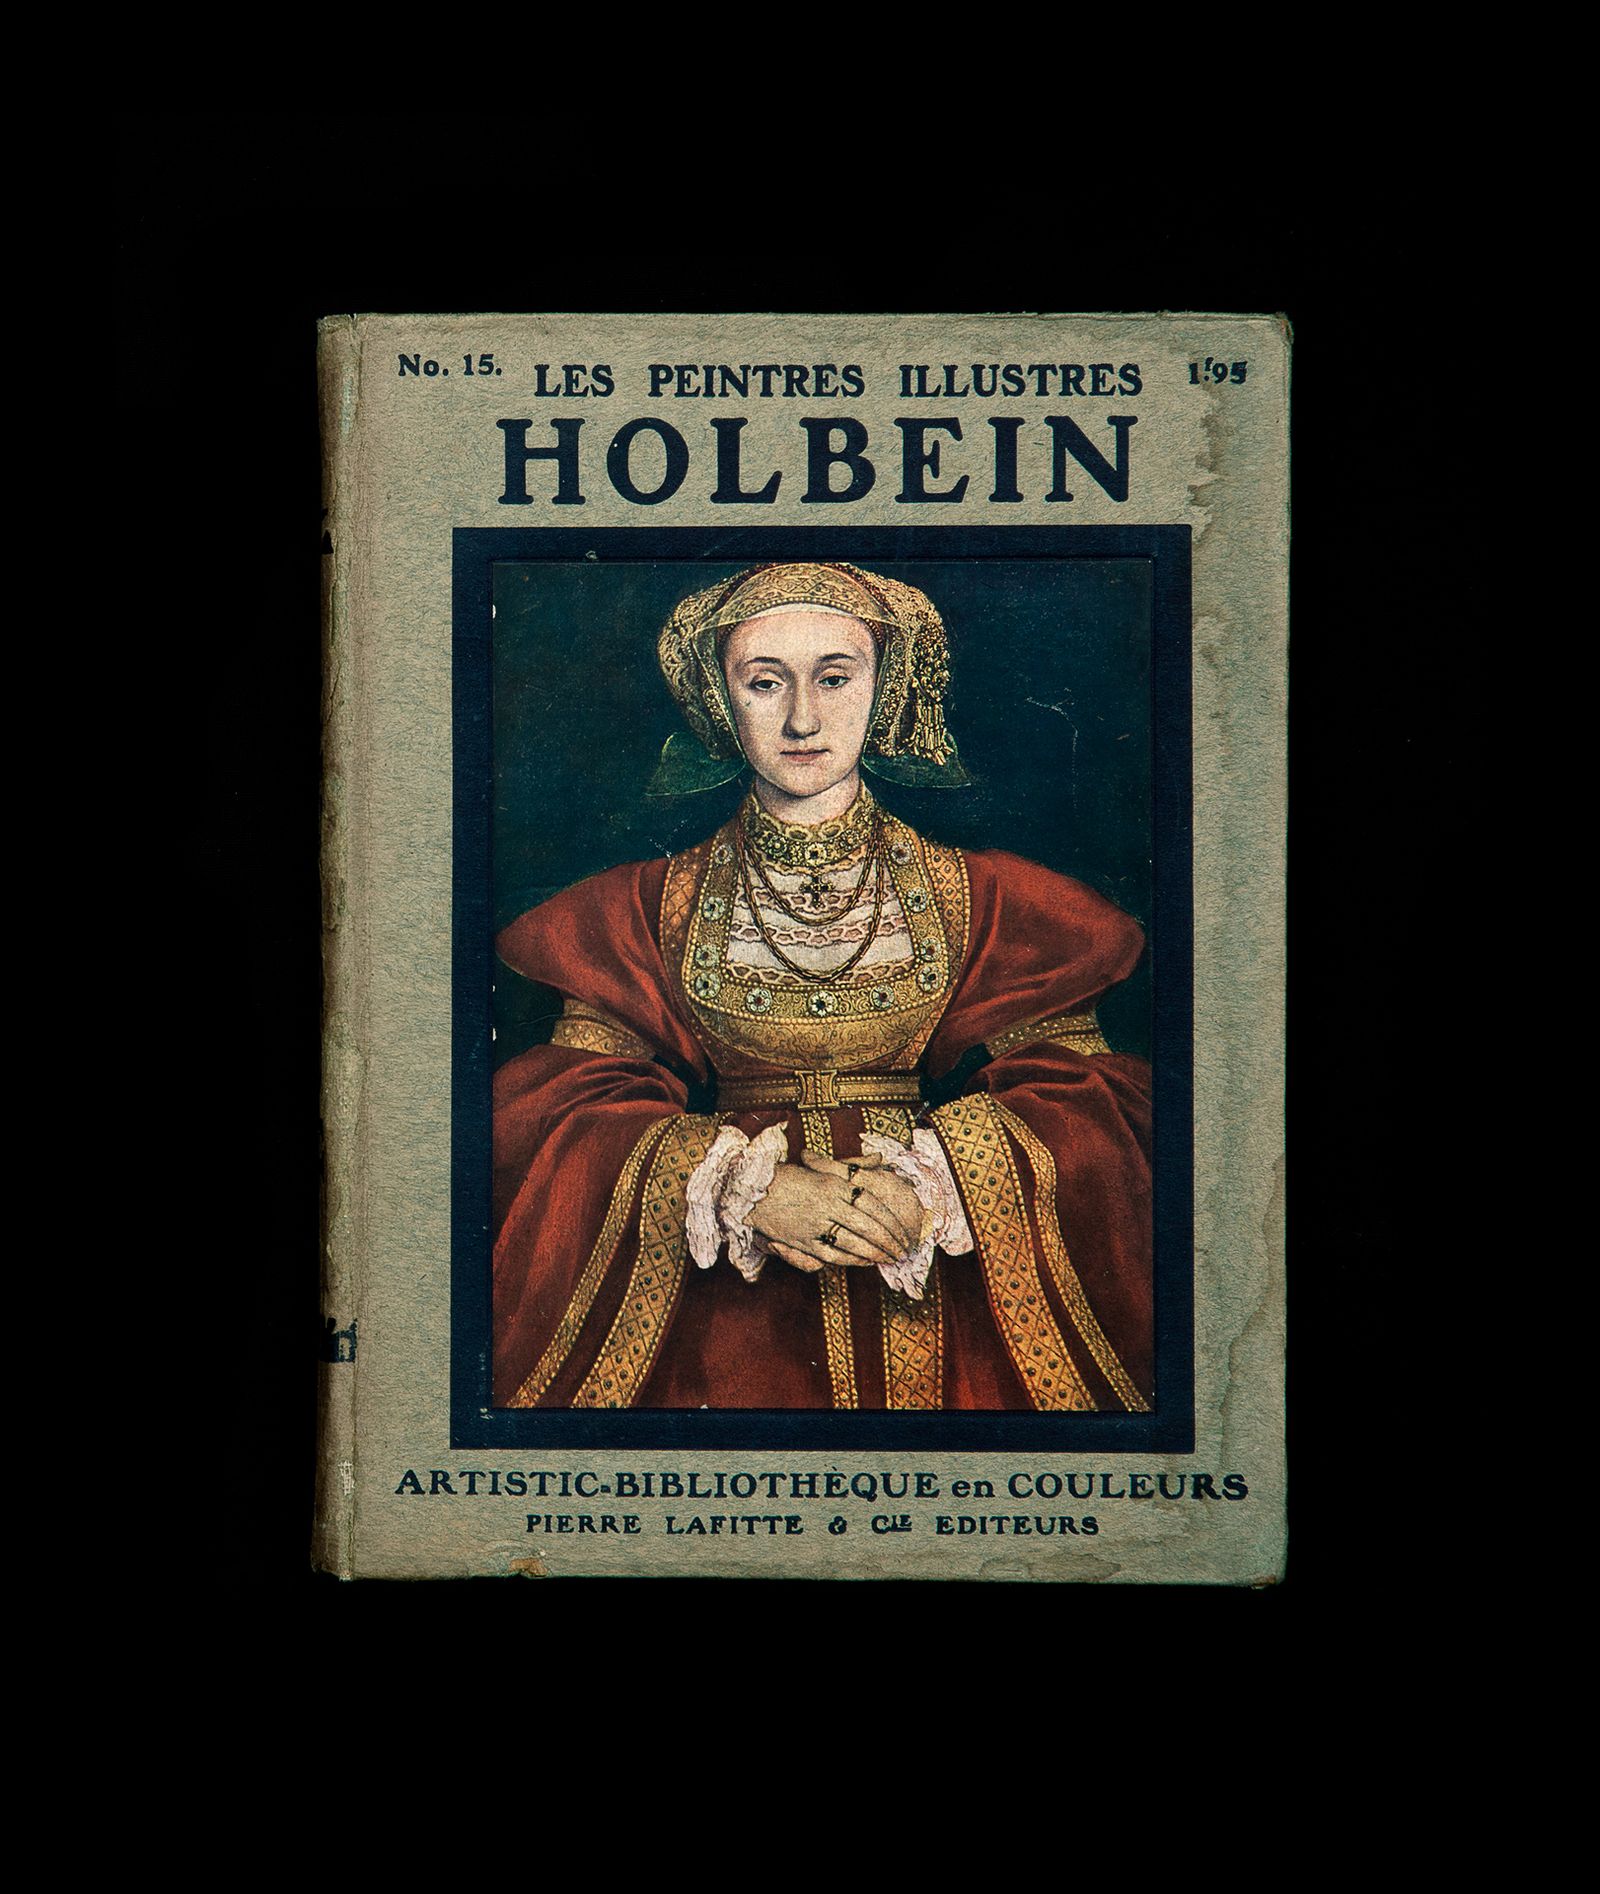 © Lihuel González - To listen to this audio book click on this link : https://archive.org/details/False_friends/holbein.mp3